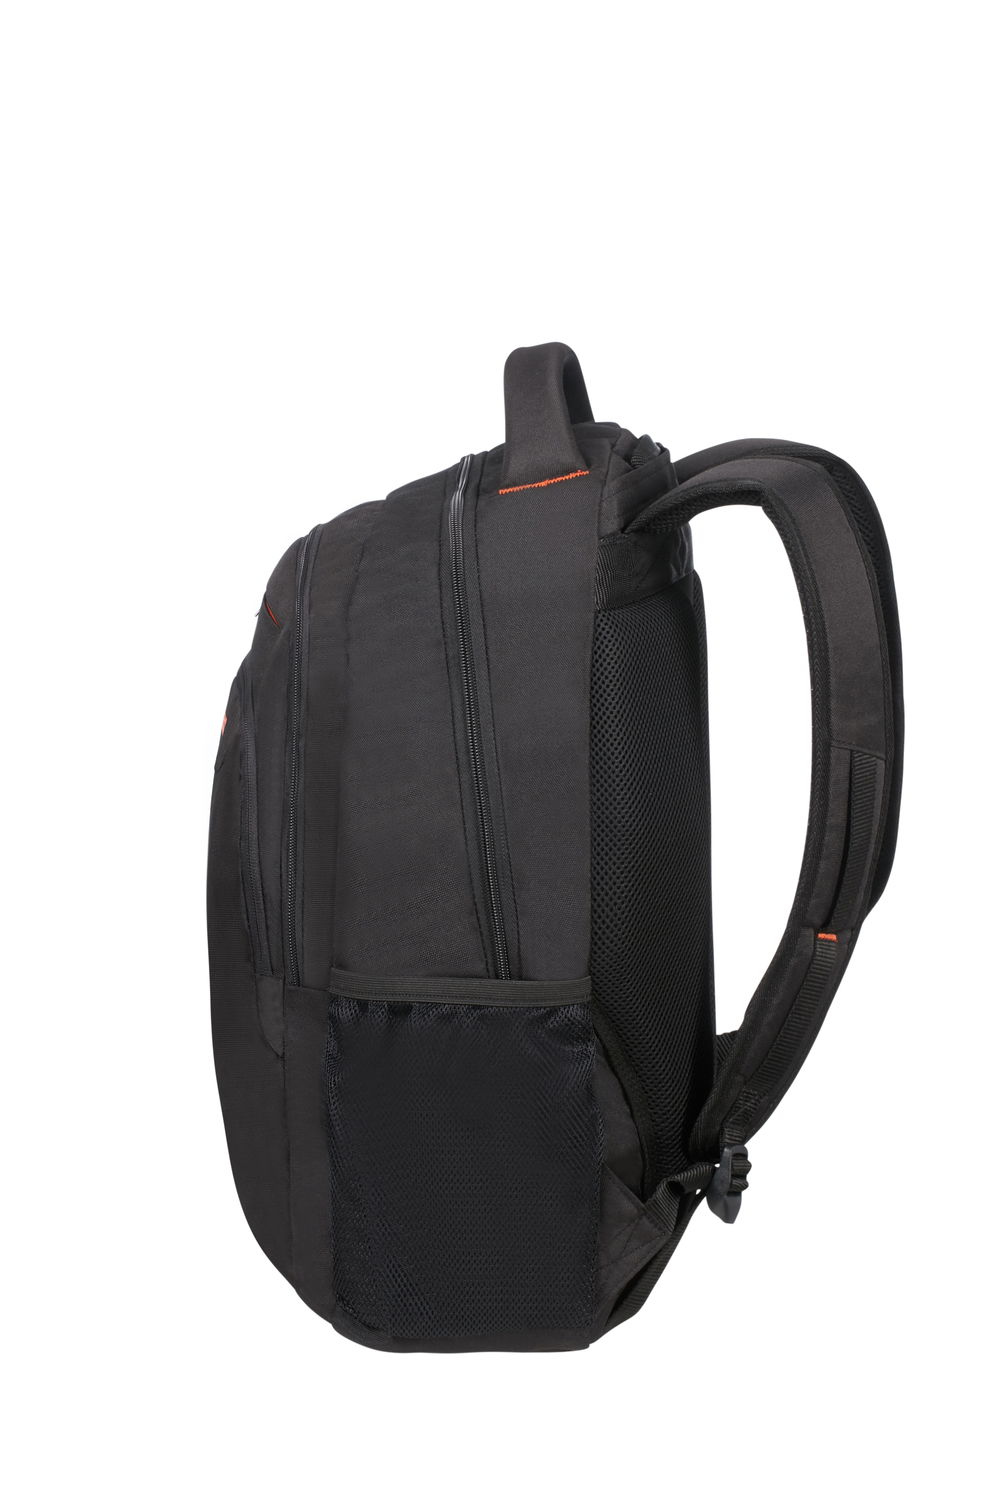 AT WORK LAPTOP BACKPACK 17.3